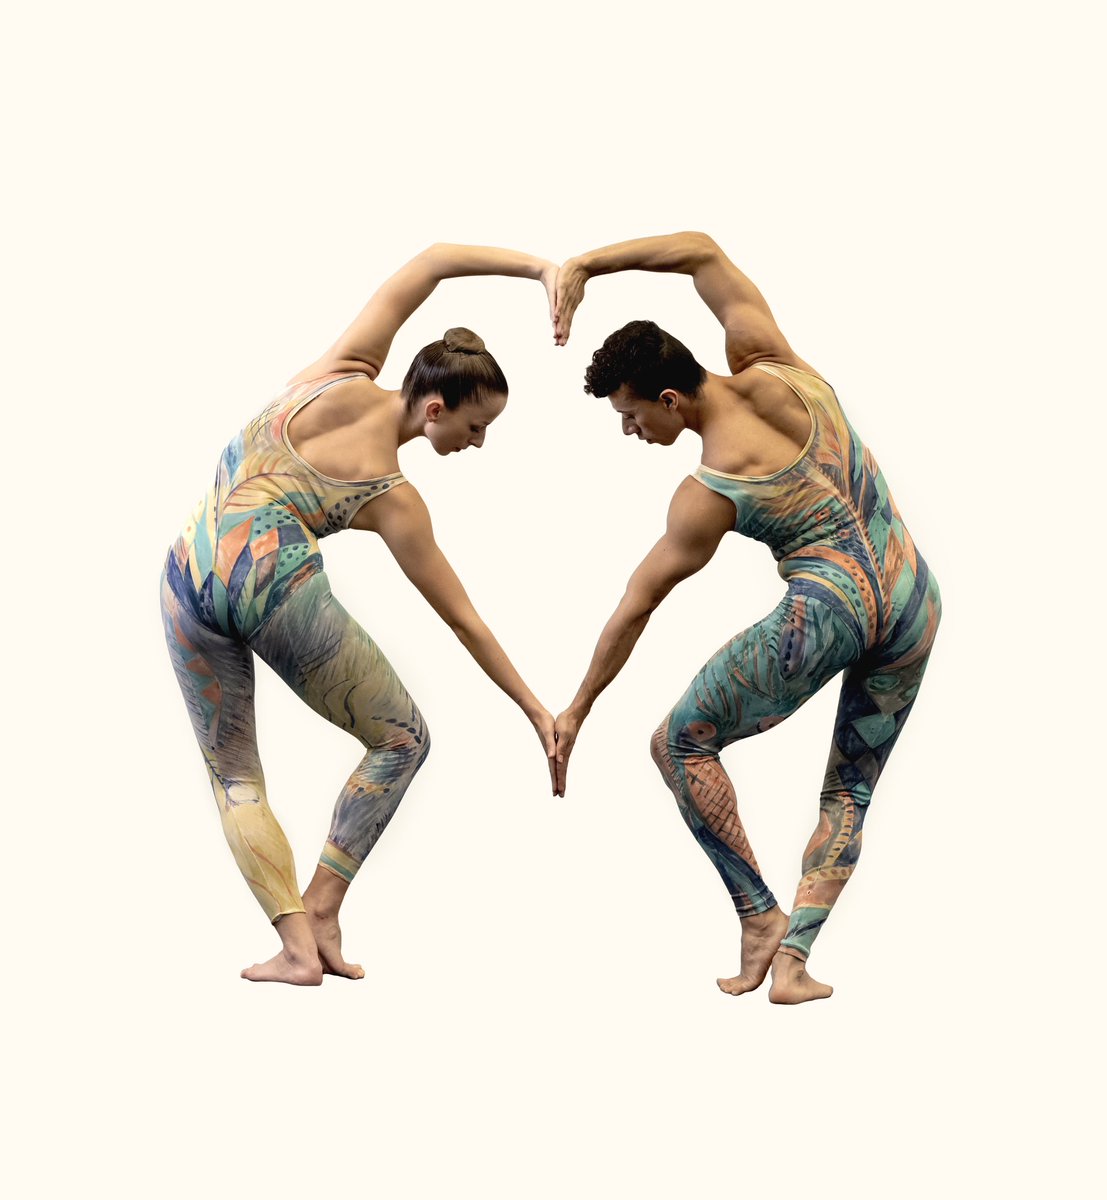 We’re kicking off our upcoming season “PAST & FUTURE” in Newcastle @dancecity on 12 June! Eliot Smith Dance will perform two astonishing #dance works featuring Paul Taylor’s classic, “DUET” from 1964. To book tickets and for full tour details visit: eliotsmithdance.com/pastandfuture